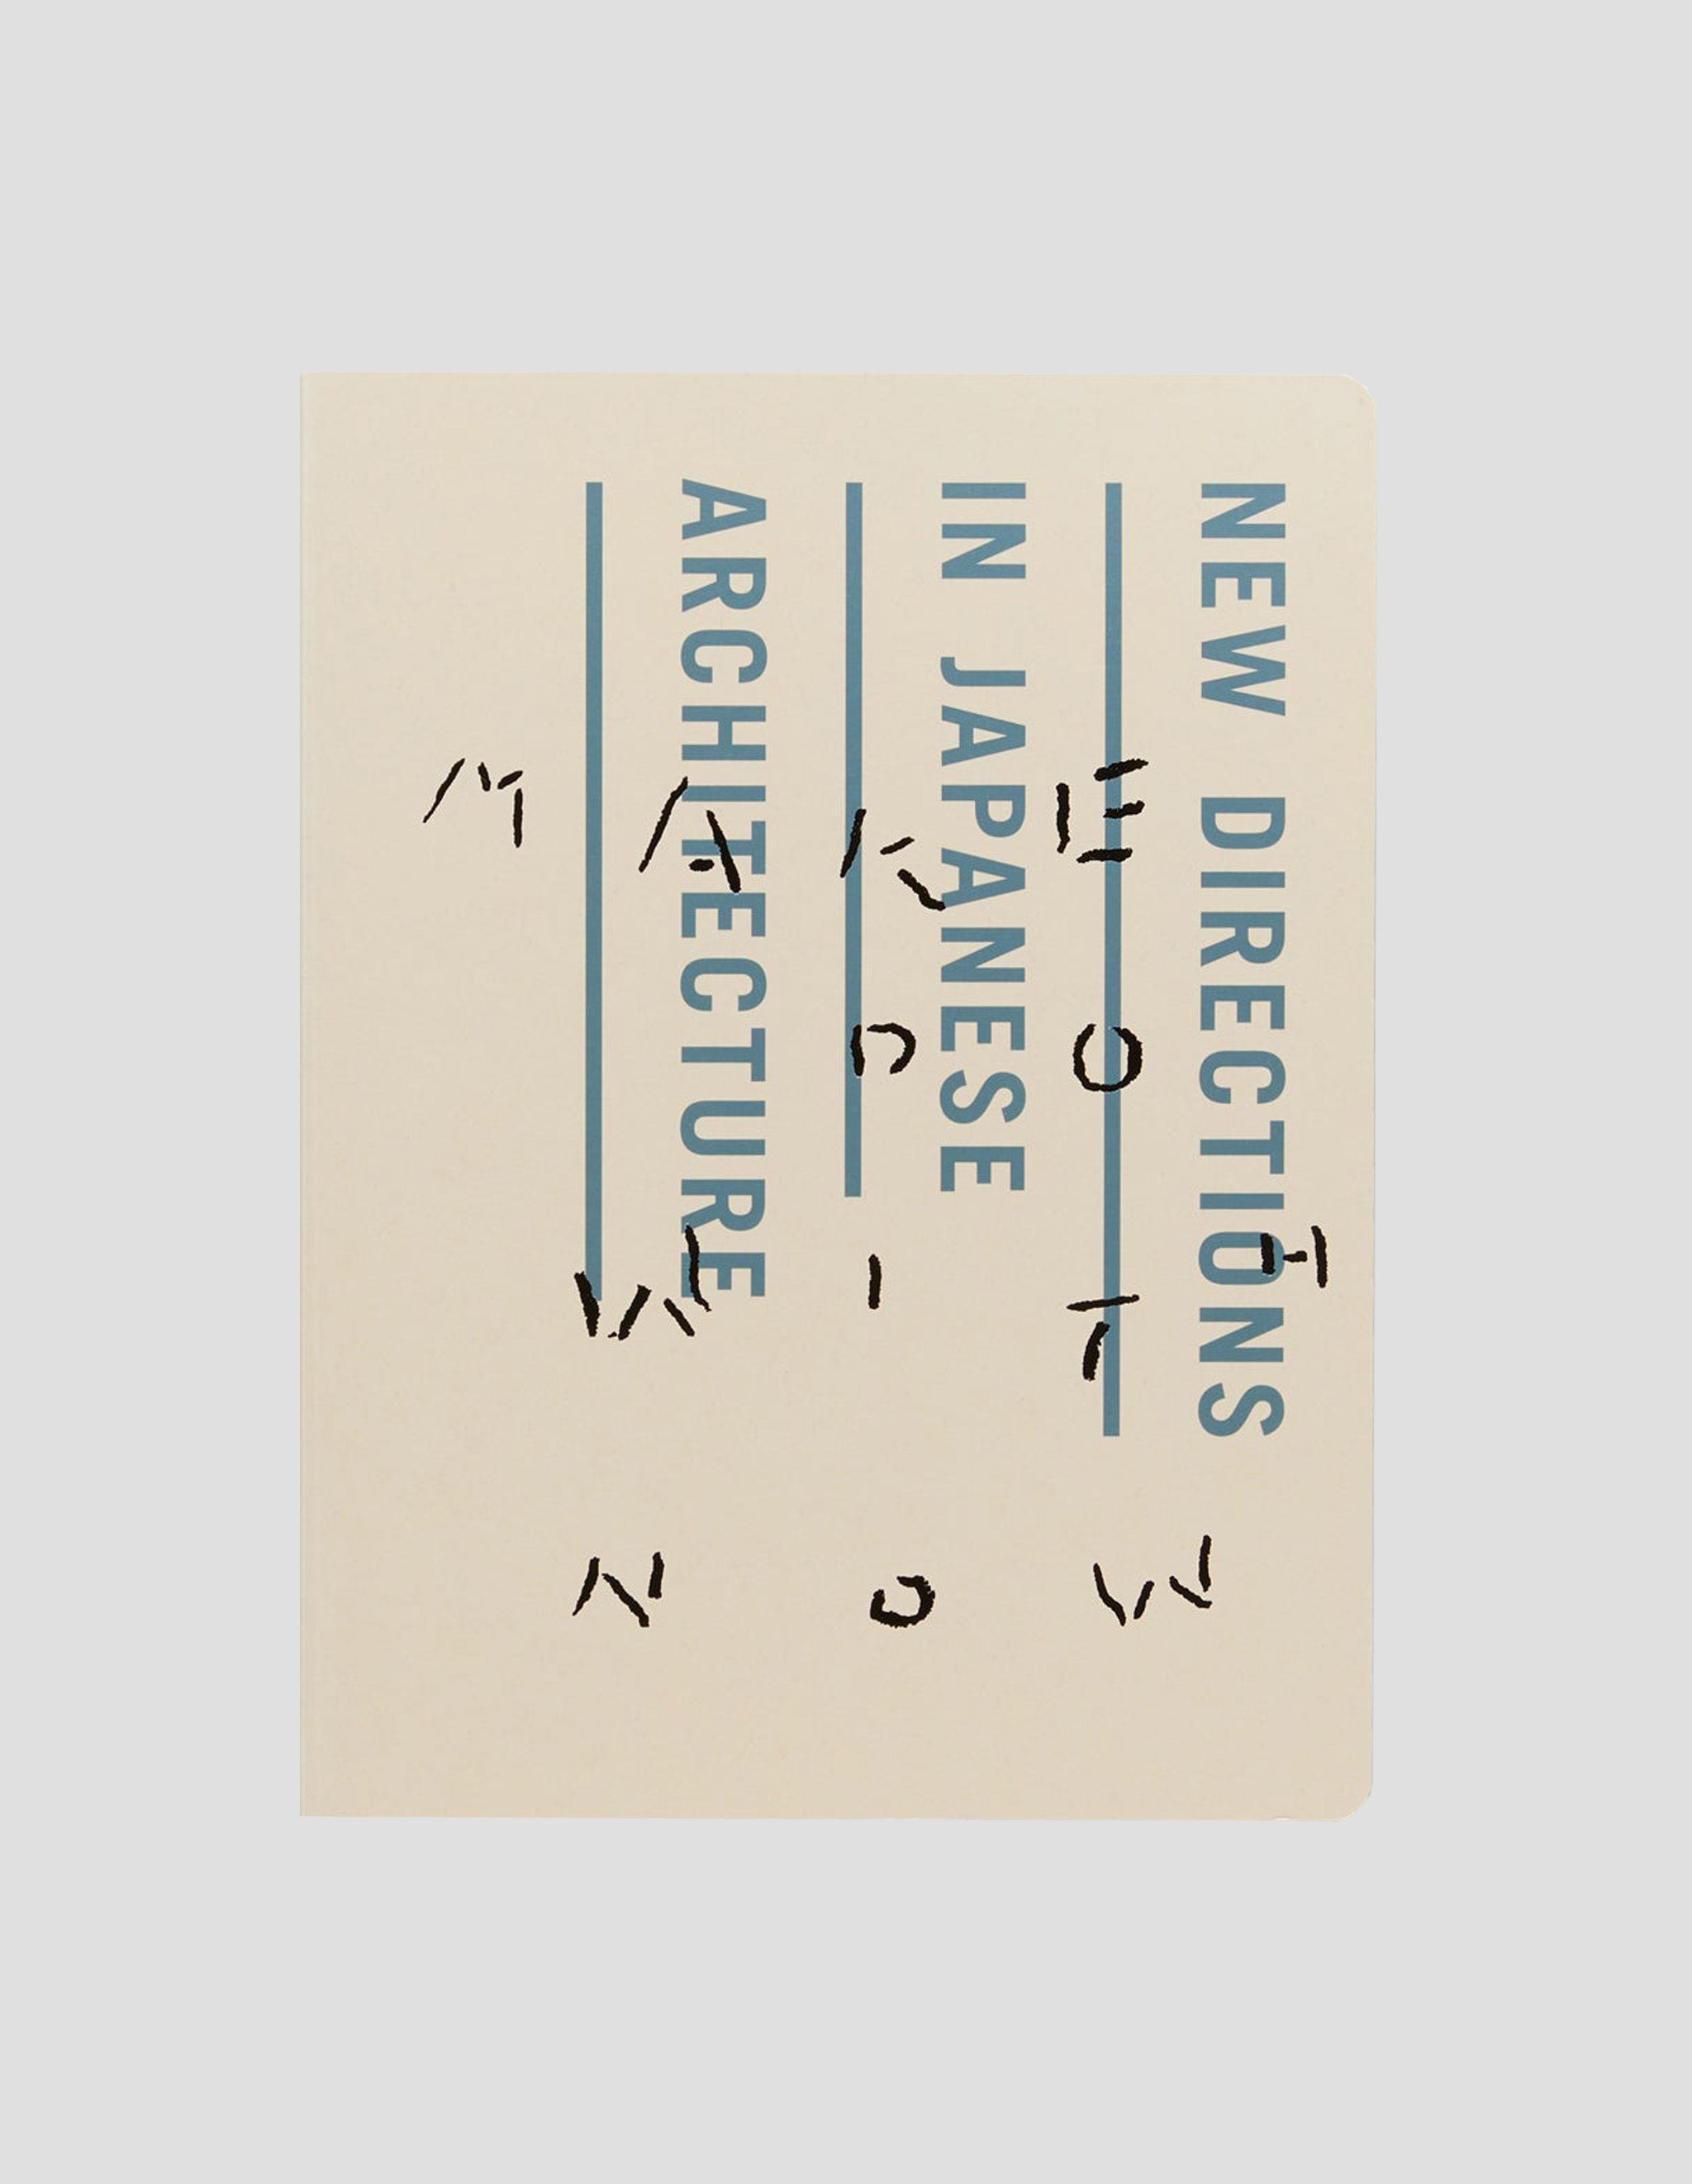 Make Do With Now - New Directions in Japanese Architecture